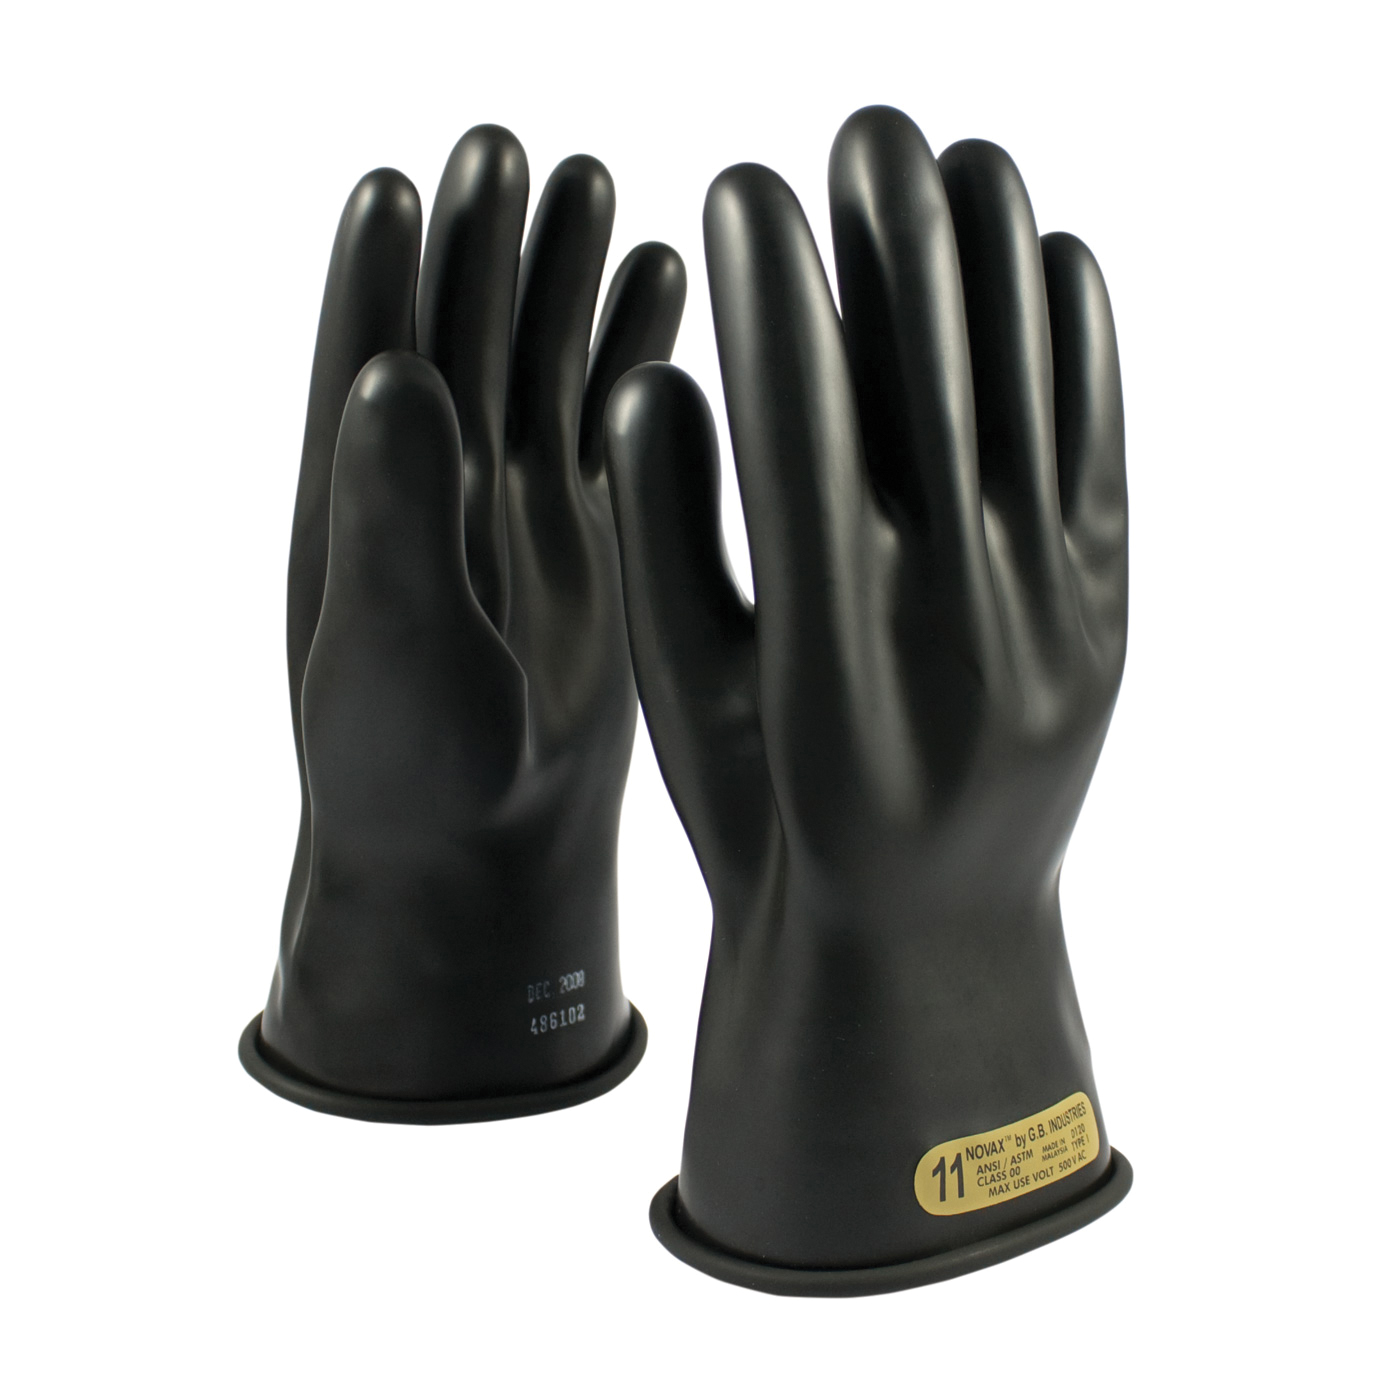 Novax® 150-00-11/9 Insulating Unisex Electrical Safety Gloves, SZ 9, Natural Rubber, Black, 11 in L, ASTM Class: Class 00, 500 VAC/750 VDC Max Use Voltage